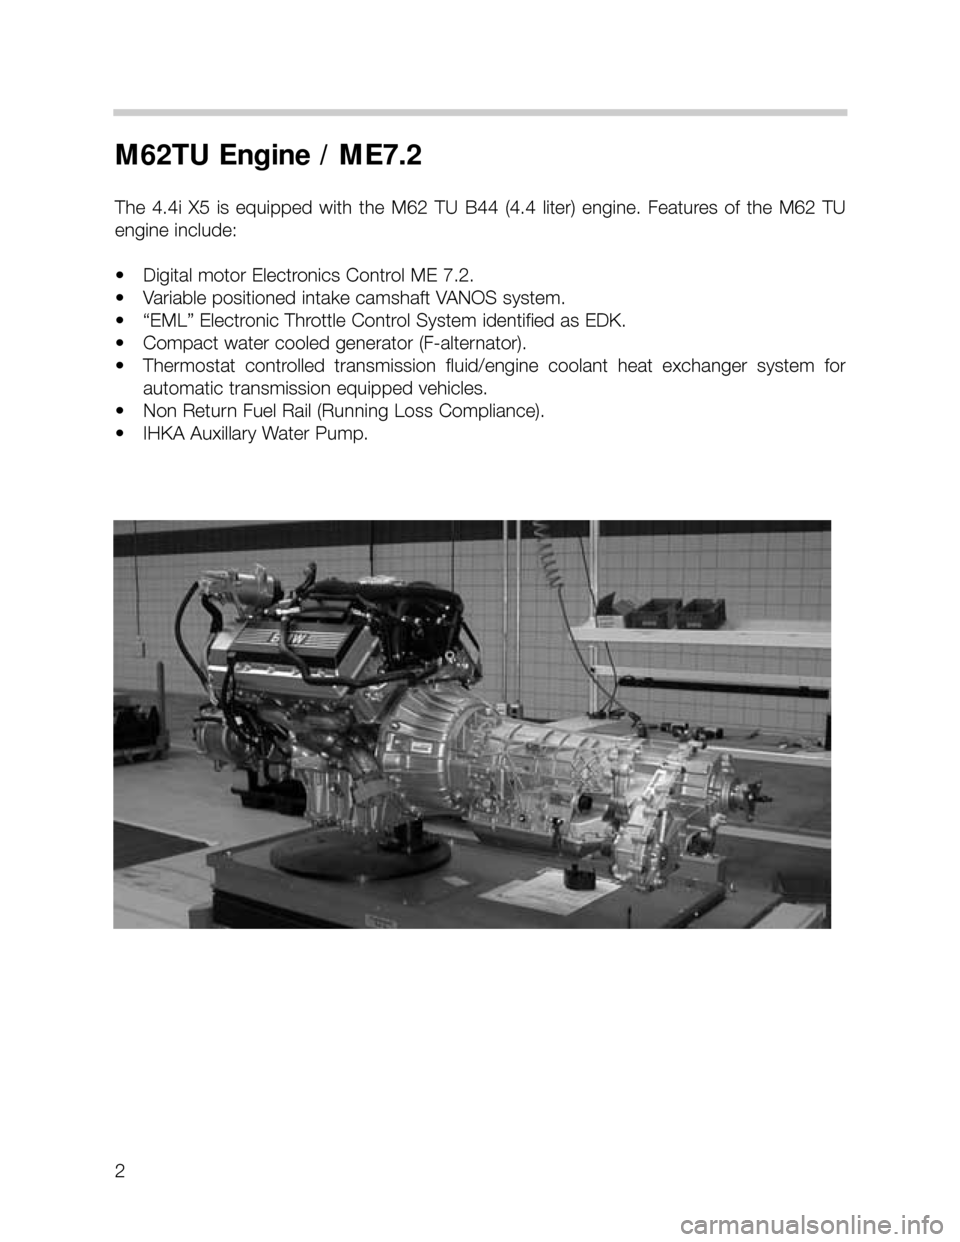 BMW X5 1999 E53 M62TU Engine Workshop Manual 2
M62TU Engine / ME7.2
The 4.4i X5 is equipped  with  the  M62  TU  B44  (4.4  liter)  engine.  Features  of  the  M62  TU
engine include:
• Digital motor Electronics Control ME 7.2.
• Variable po